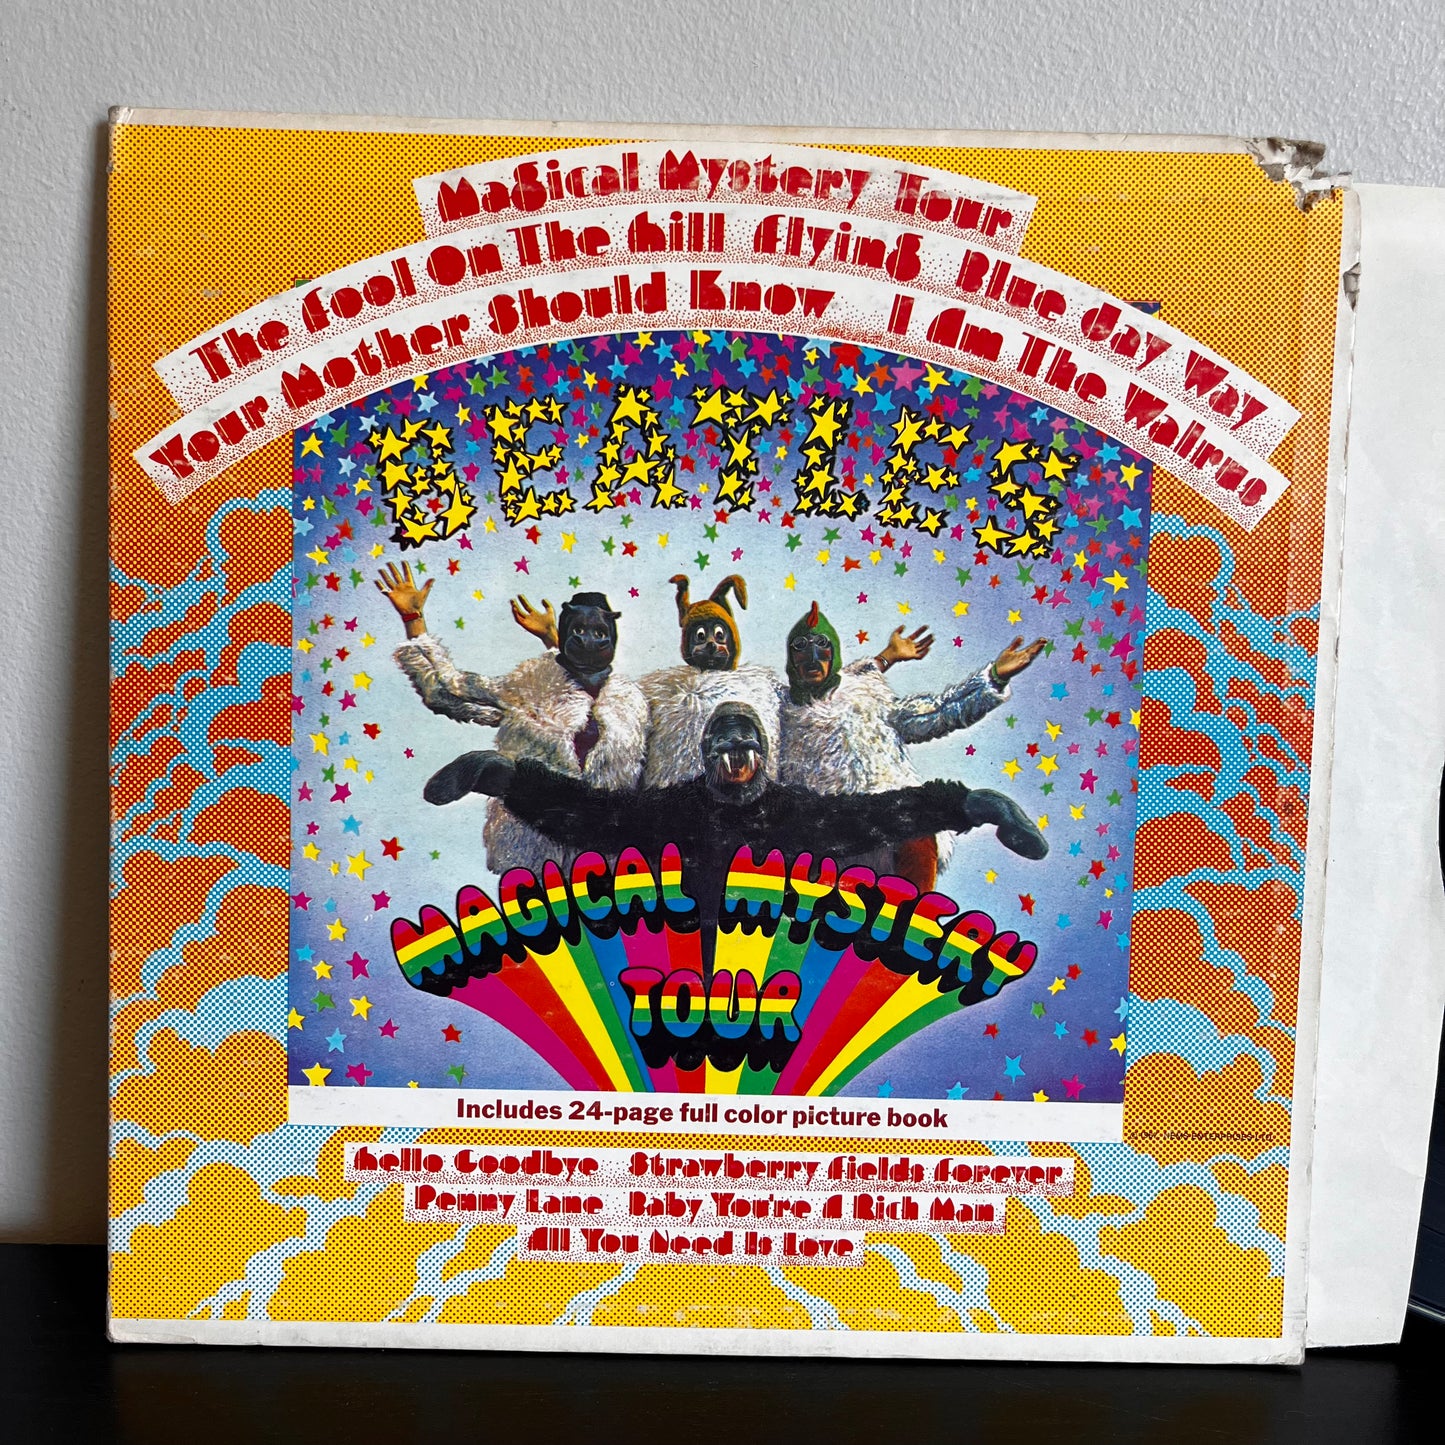 Magical Mystery Tour - The Beatles Picture Book 1967 MAL 2835 Used Vinyl VG+